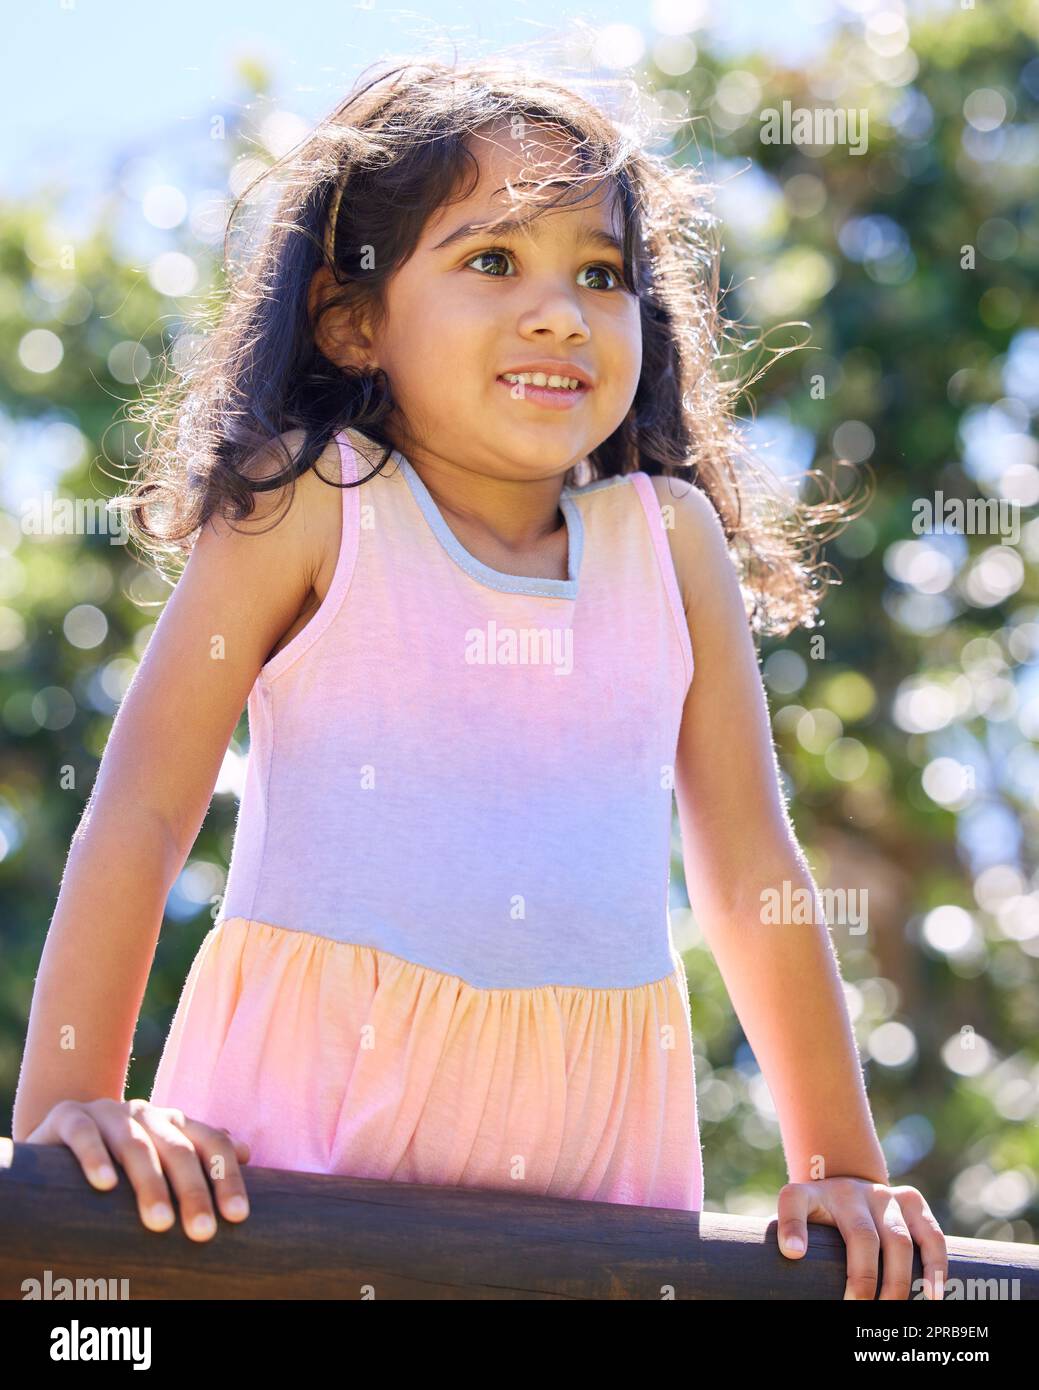 The playground is my favourite place. an adorable little girl spending time outside. Stock Photo